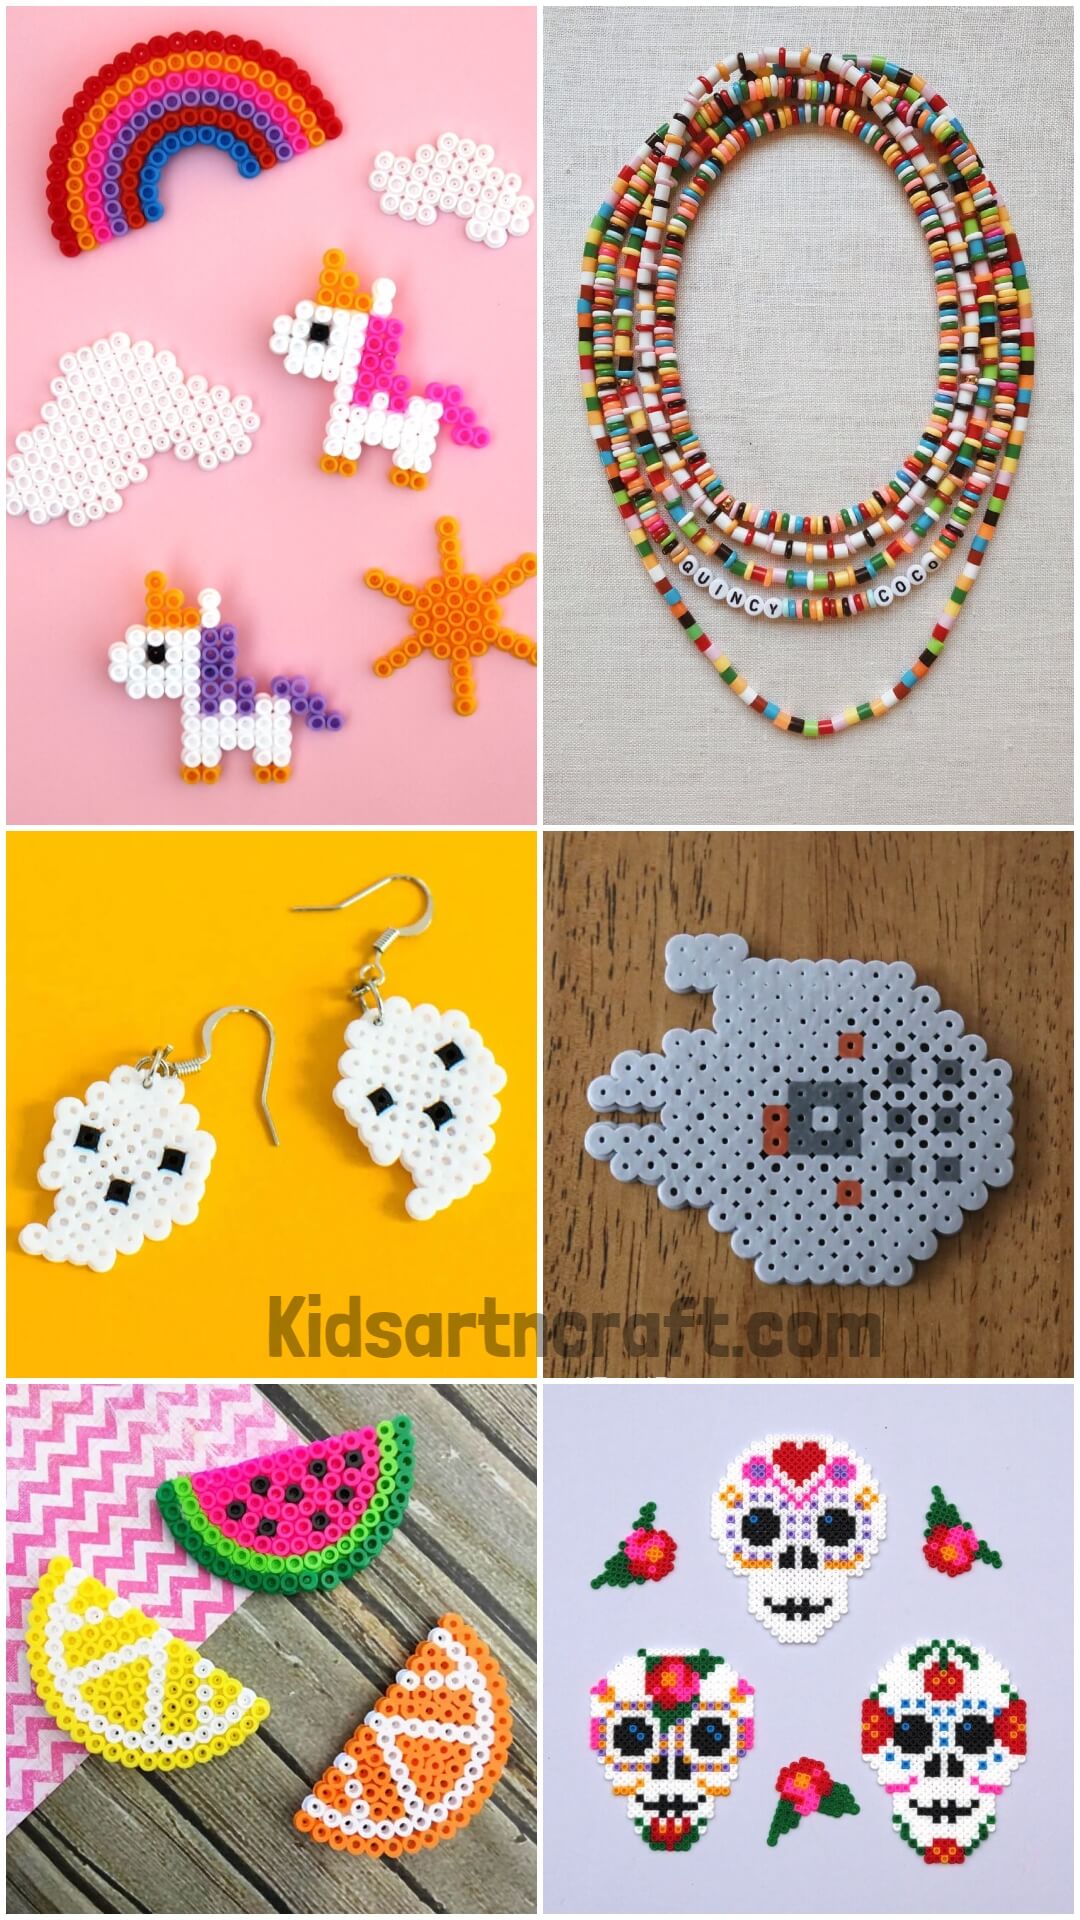 Easy Perler Bead Patterns Anyone Can Do